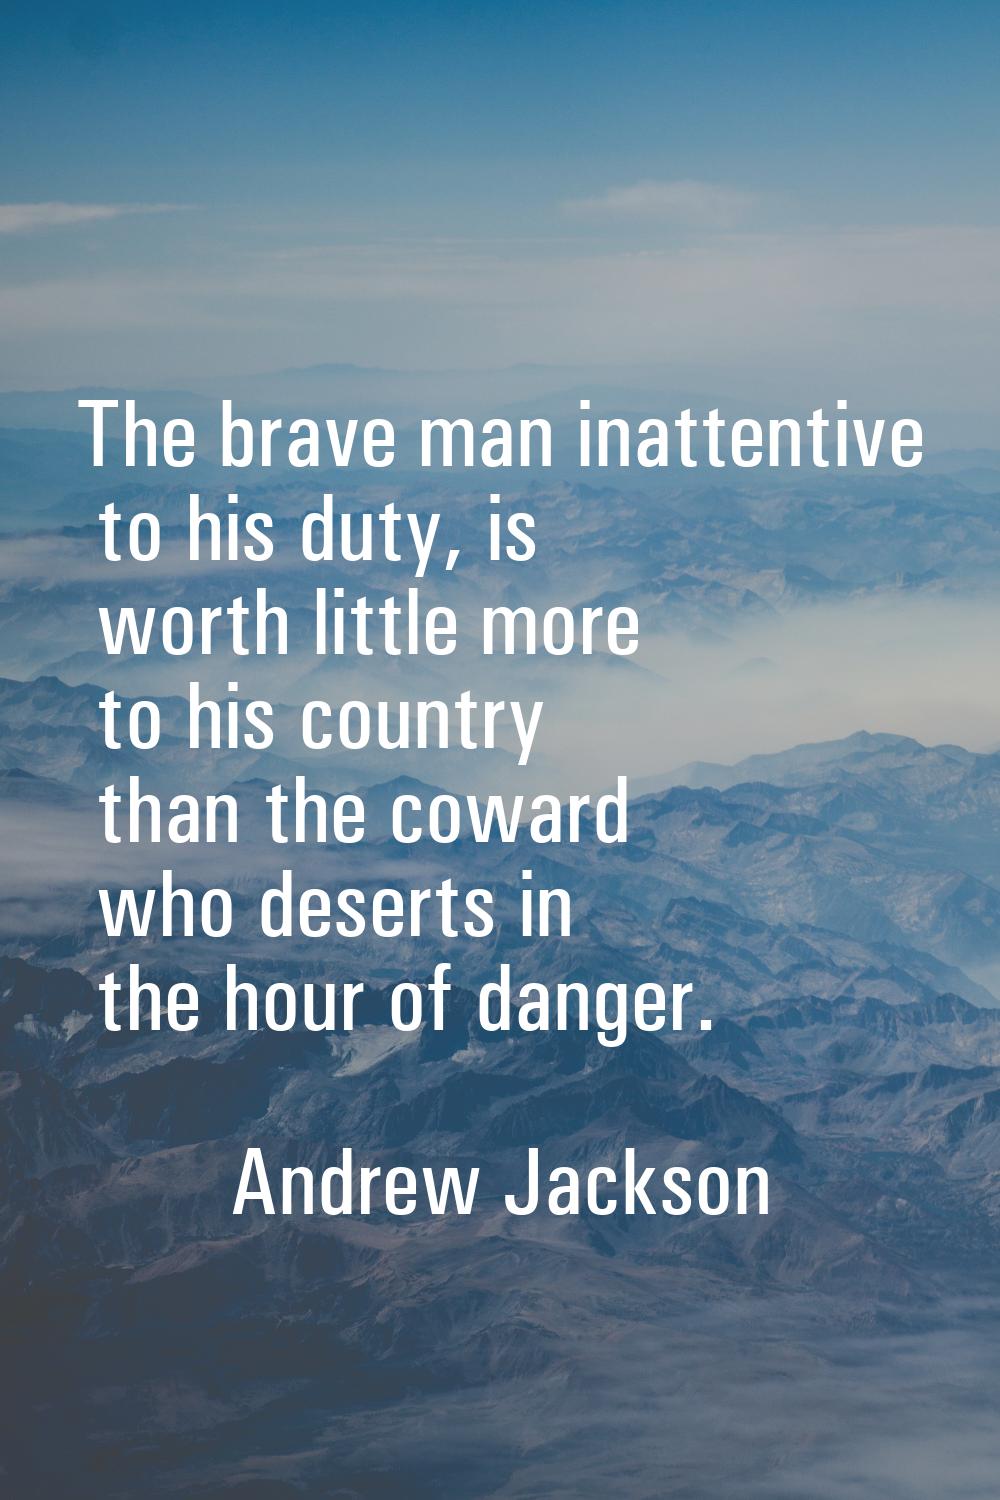 The brave man inattentive to his duty, is worth little more to his country than the coward who dese